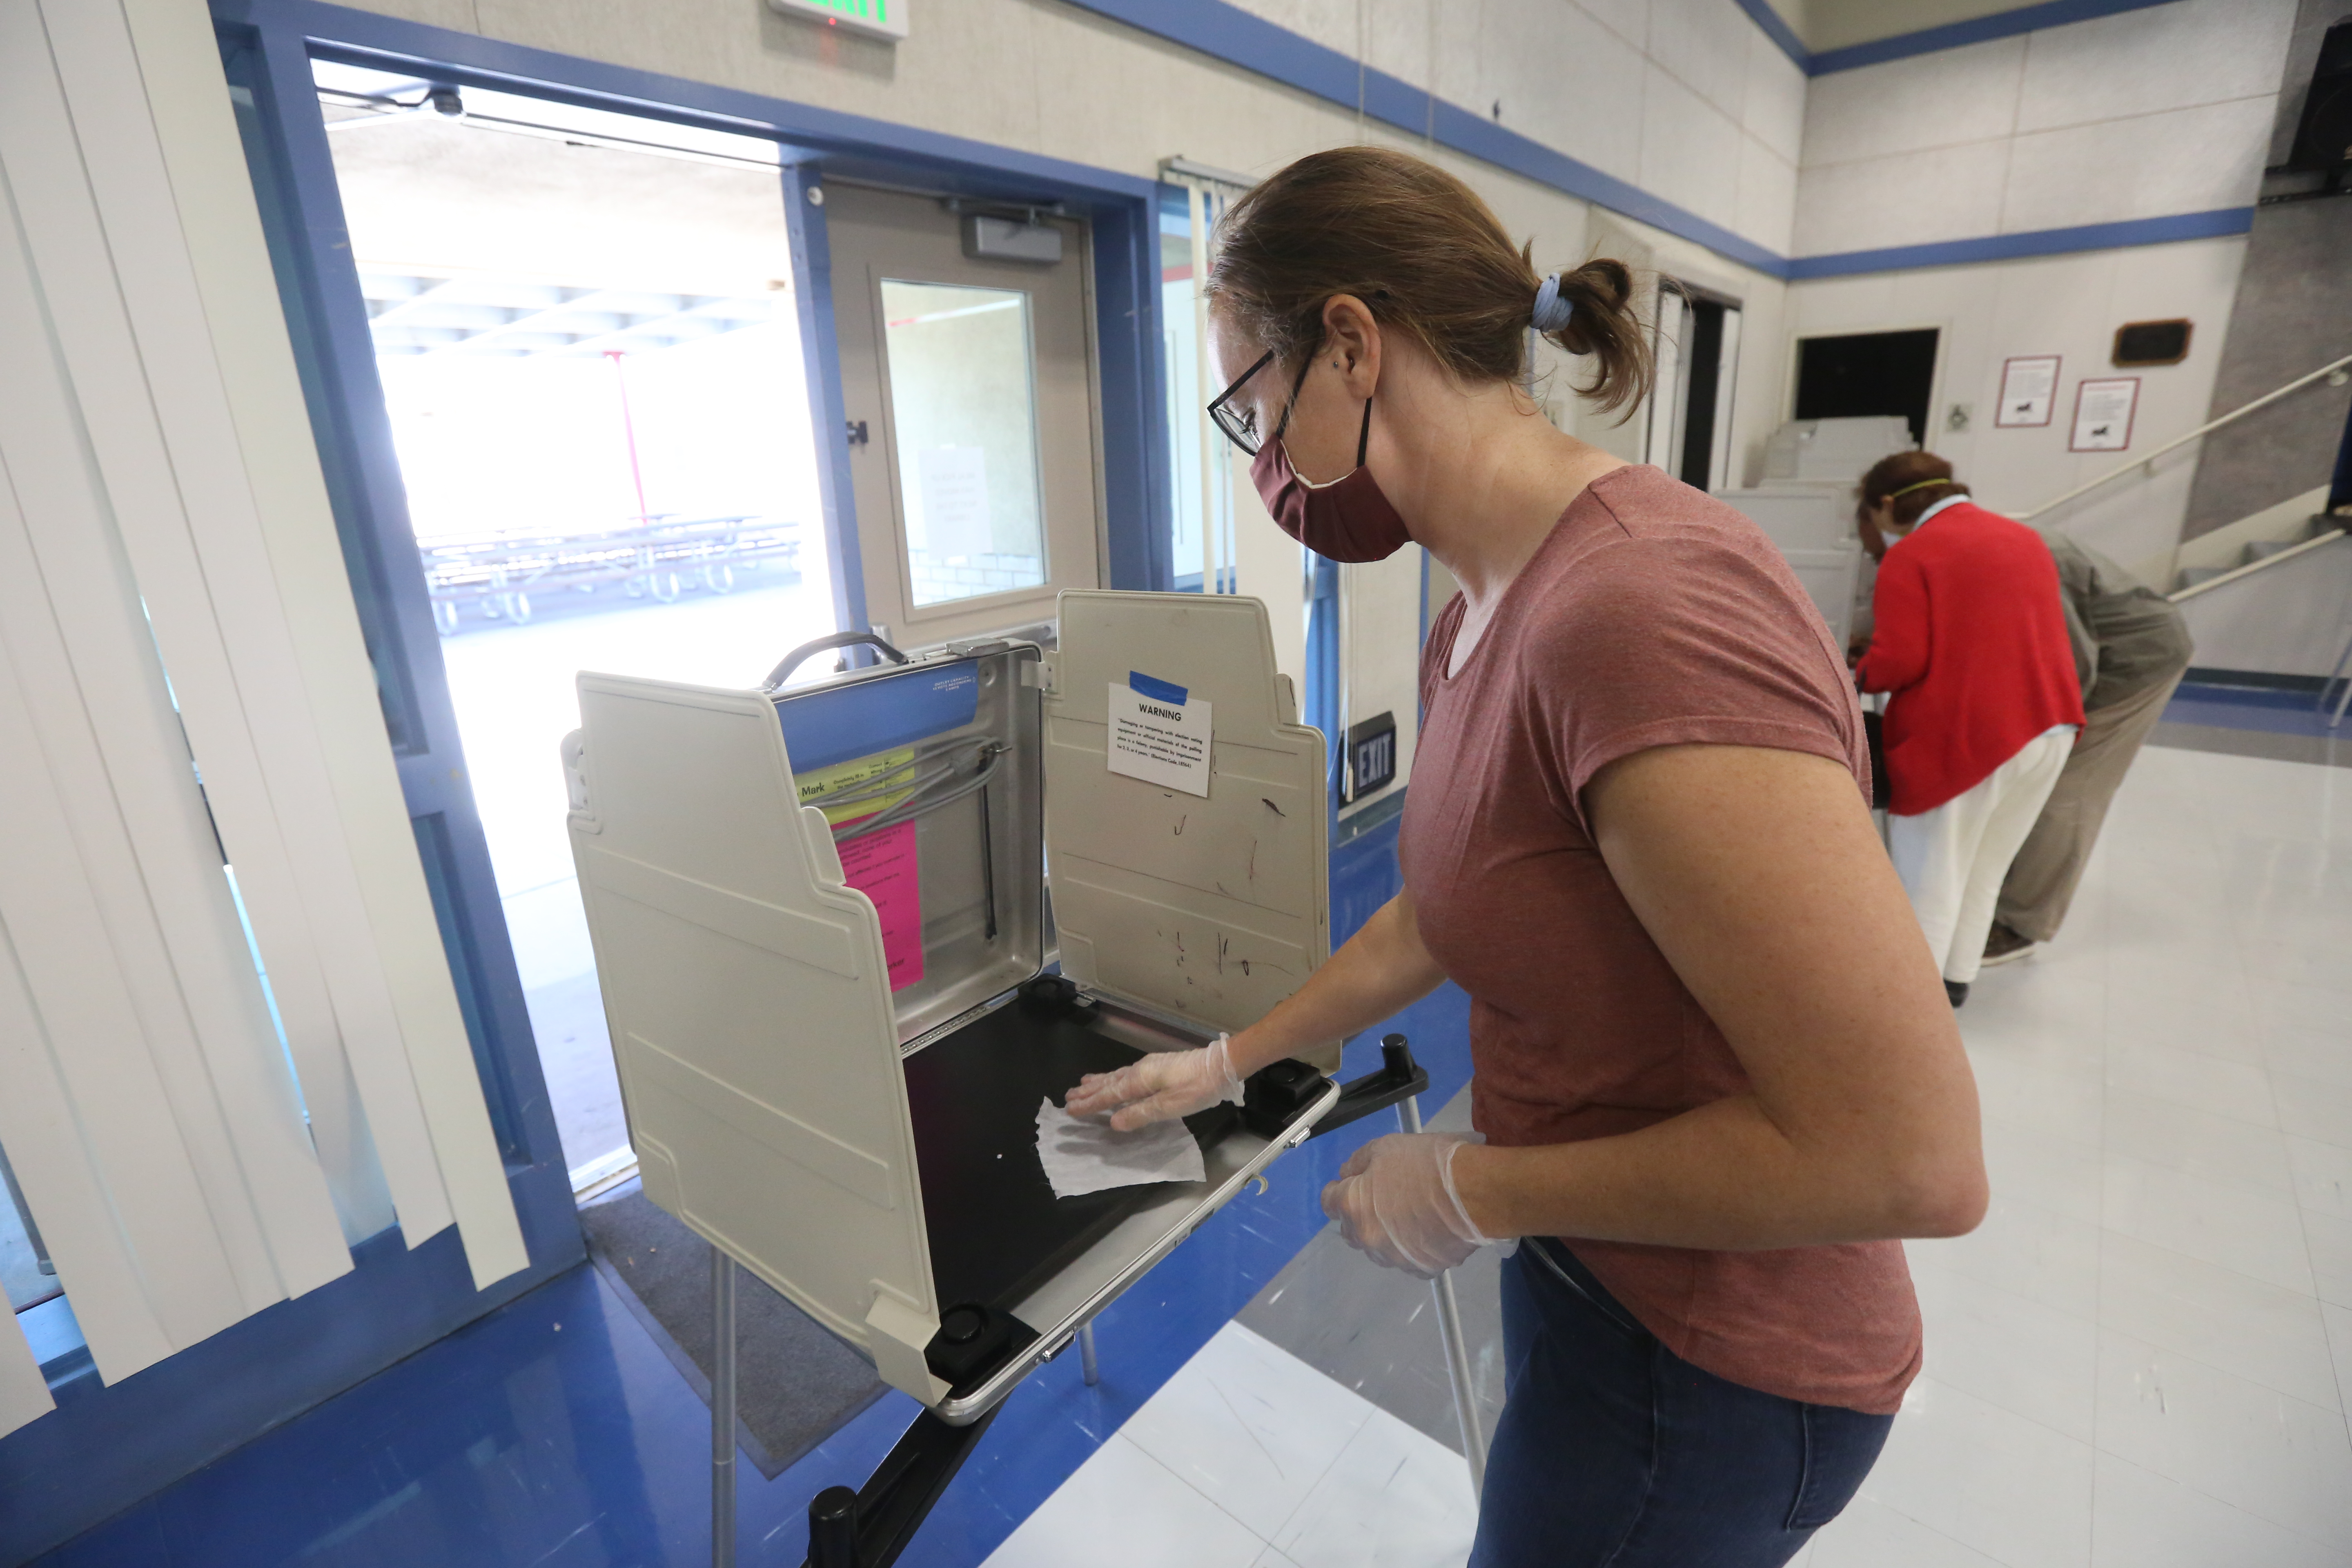 Owen Yancher, "A California poll worker sanitizes a voting booth following its use at a Voter Assistance Center in Davis, CA during the 2020 General Election," October 31, 2020, Wikimedia Commons, https://commons.wikimedia.org/wiki/File:Poll_worker_sanitizes_election_booth.jpg. 